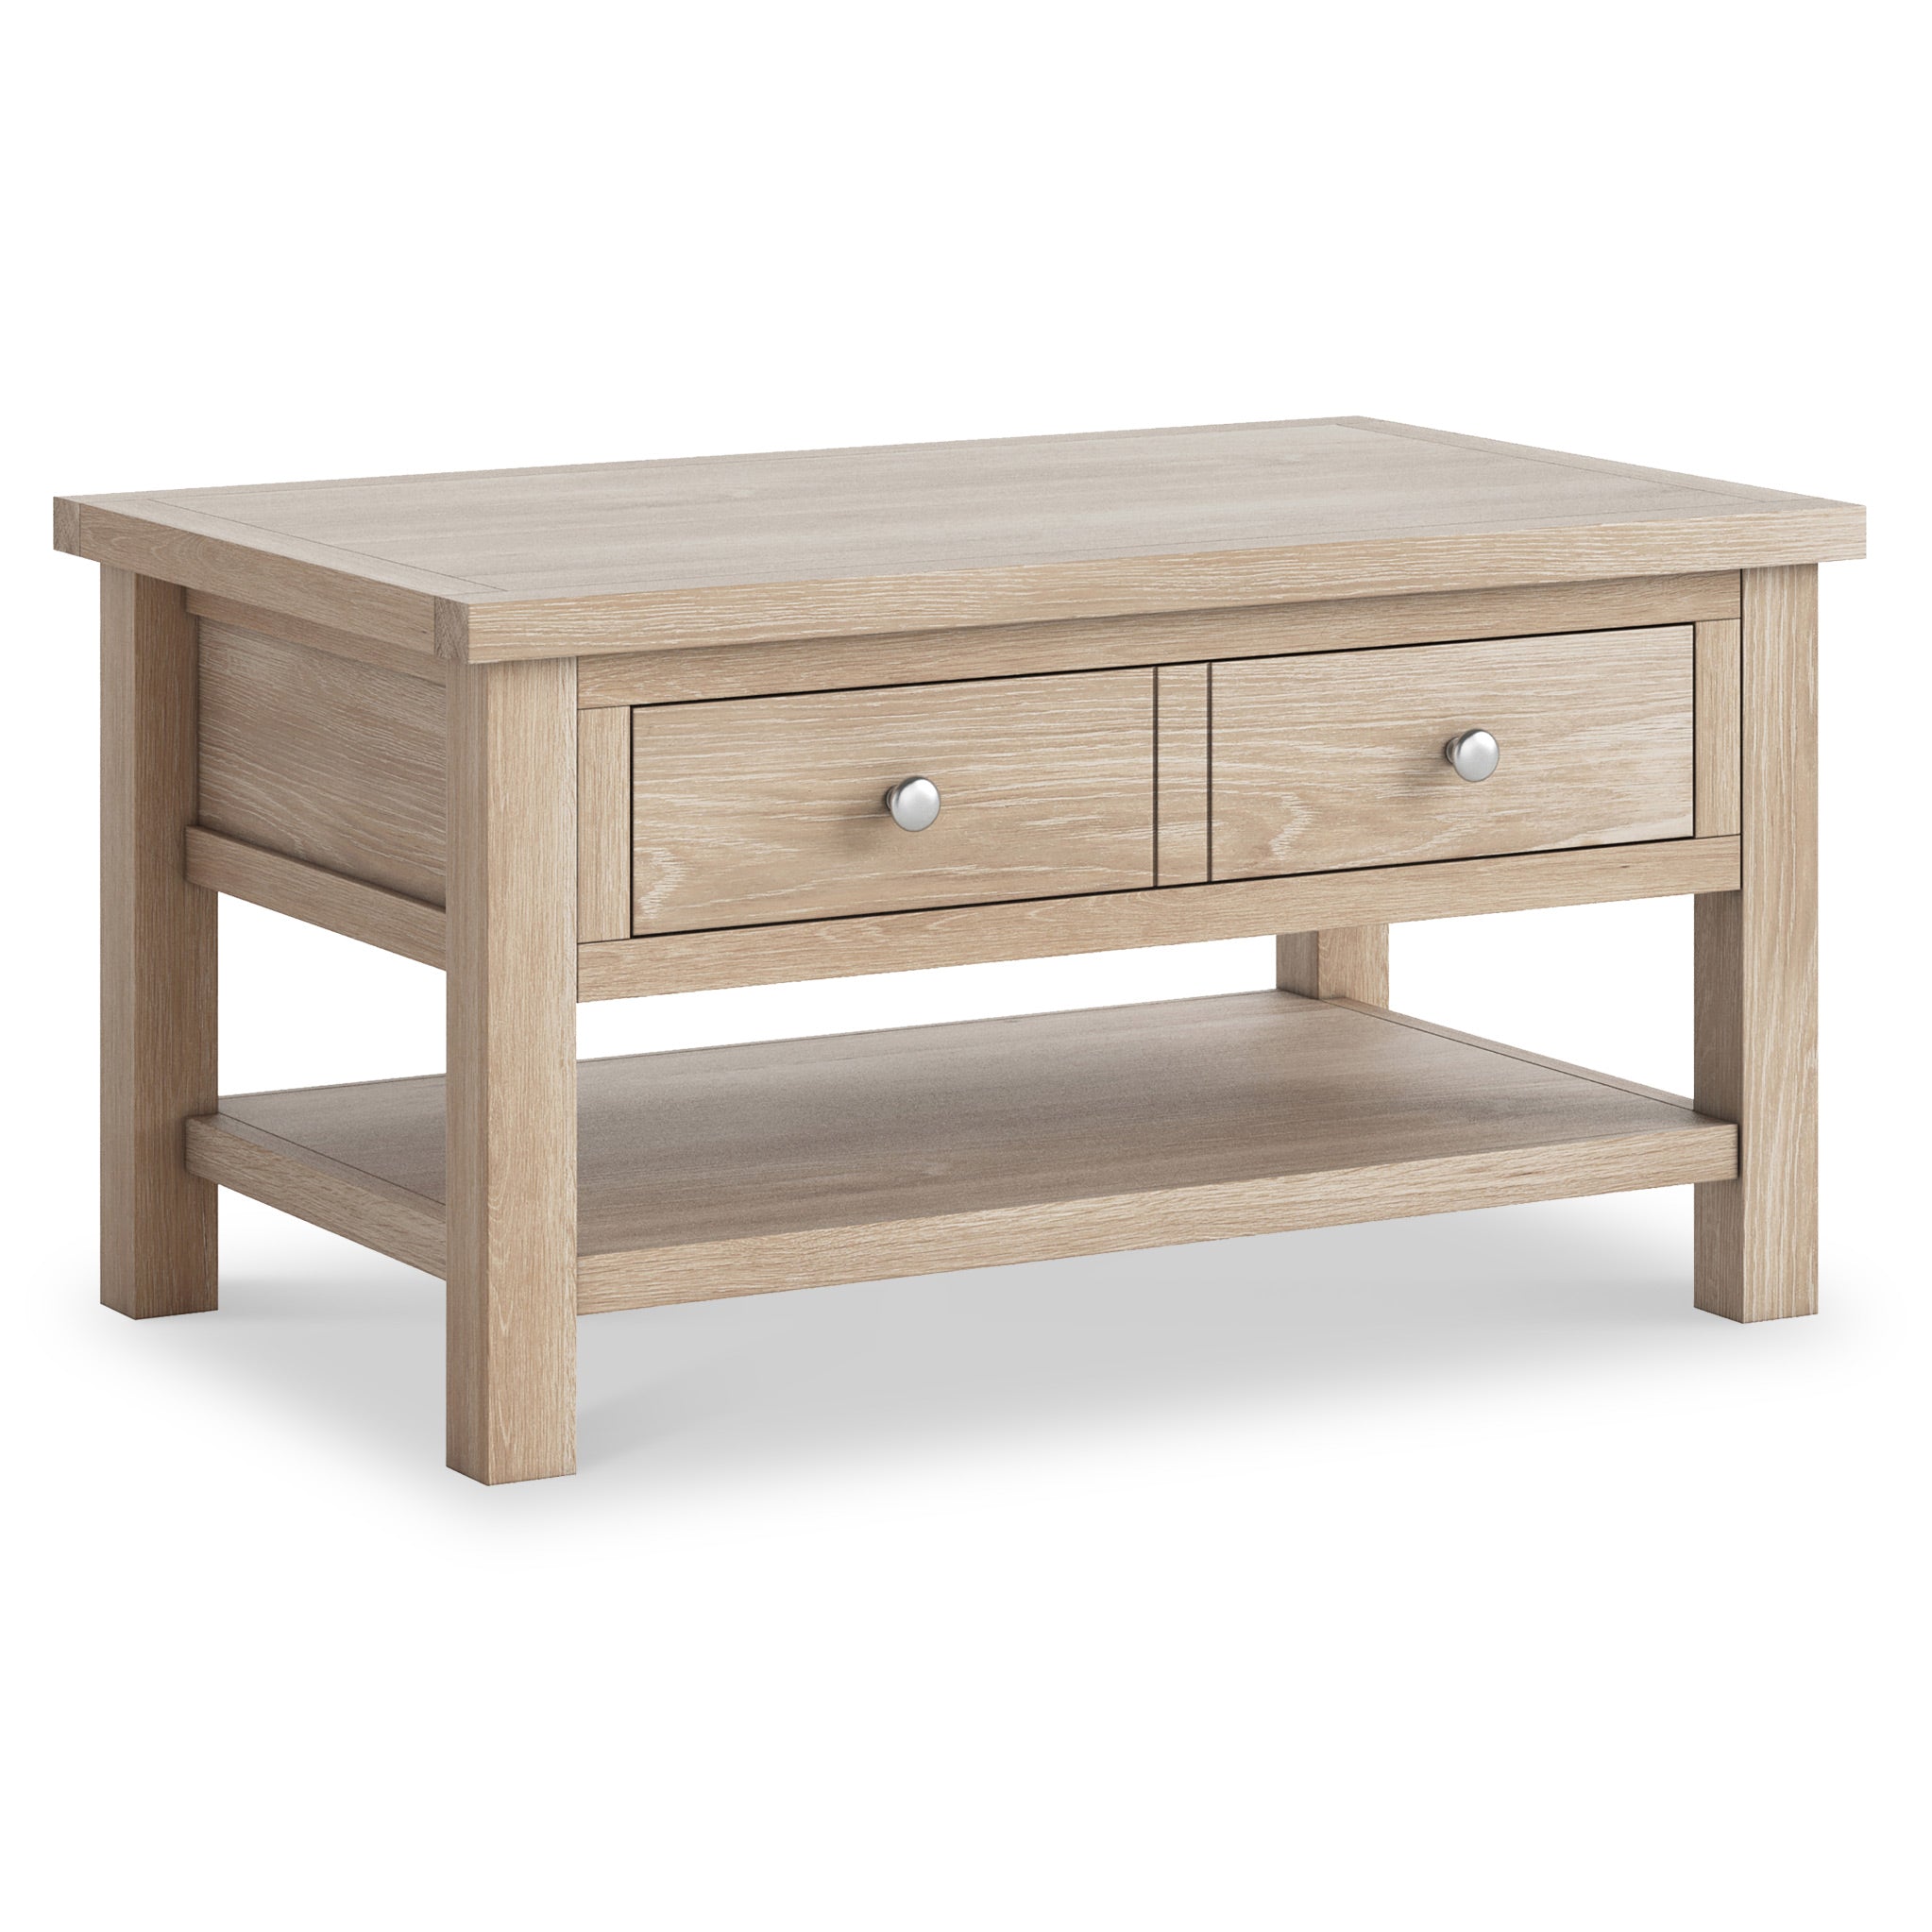 Farrow Oak Coffee Table With Storage Drawer For Living Room Roseland